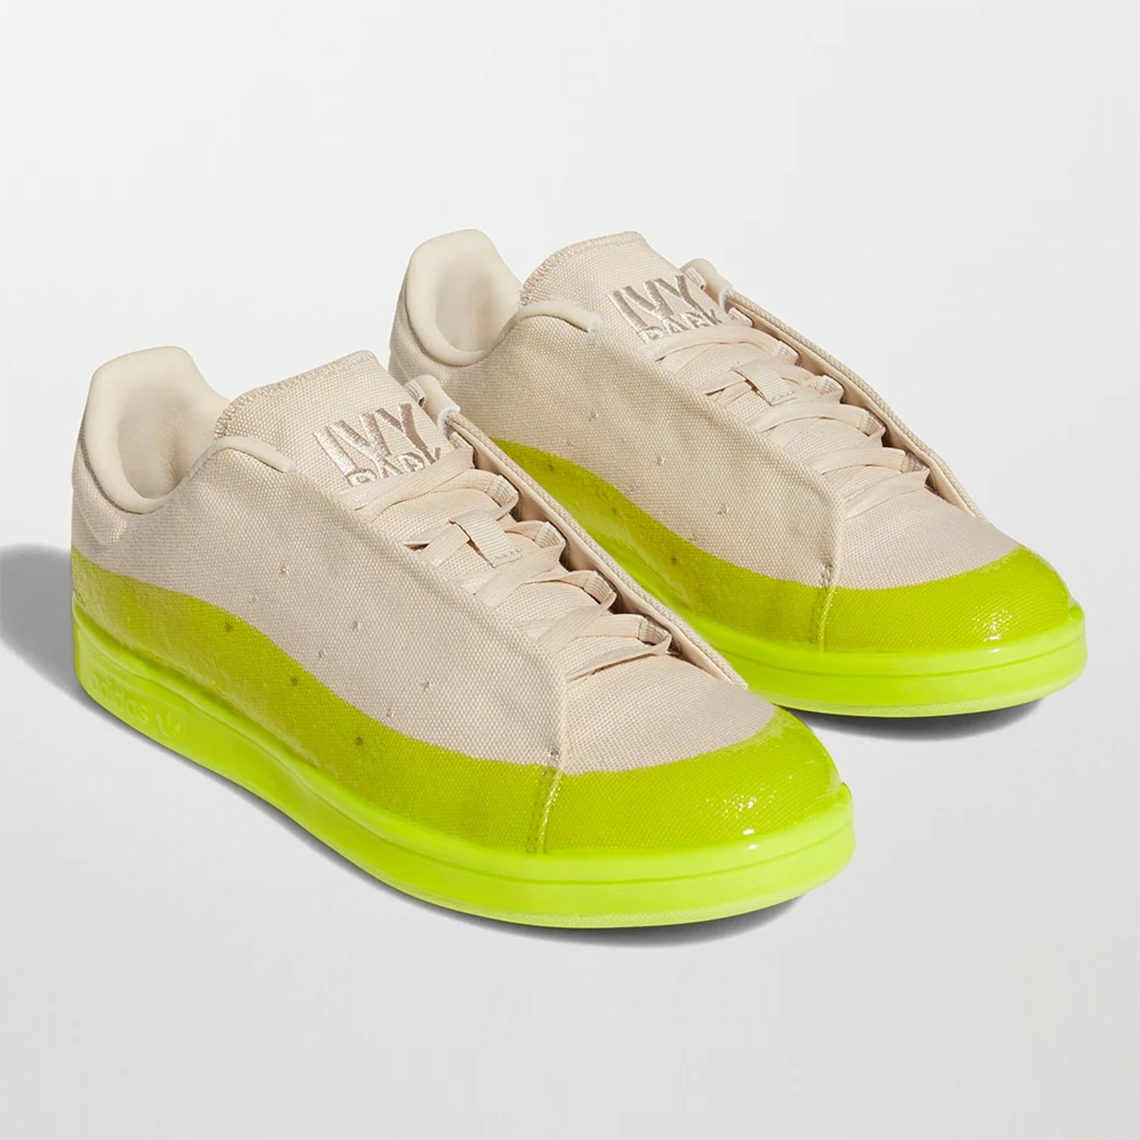 beyonce ivy park adidas stan smith dipped HR0180